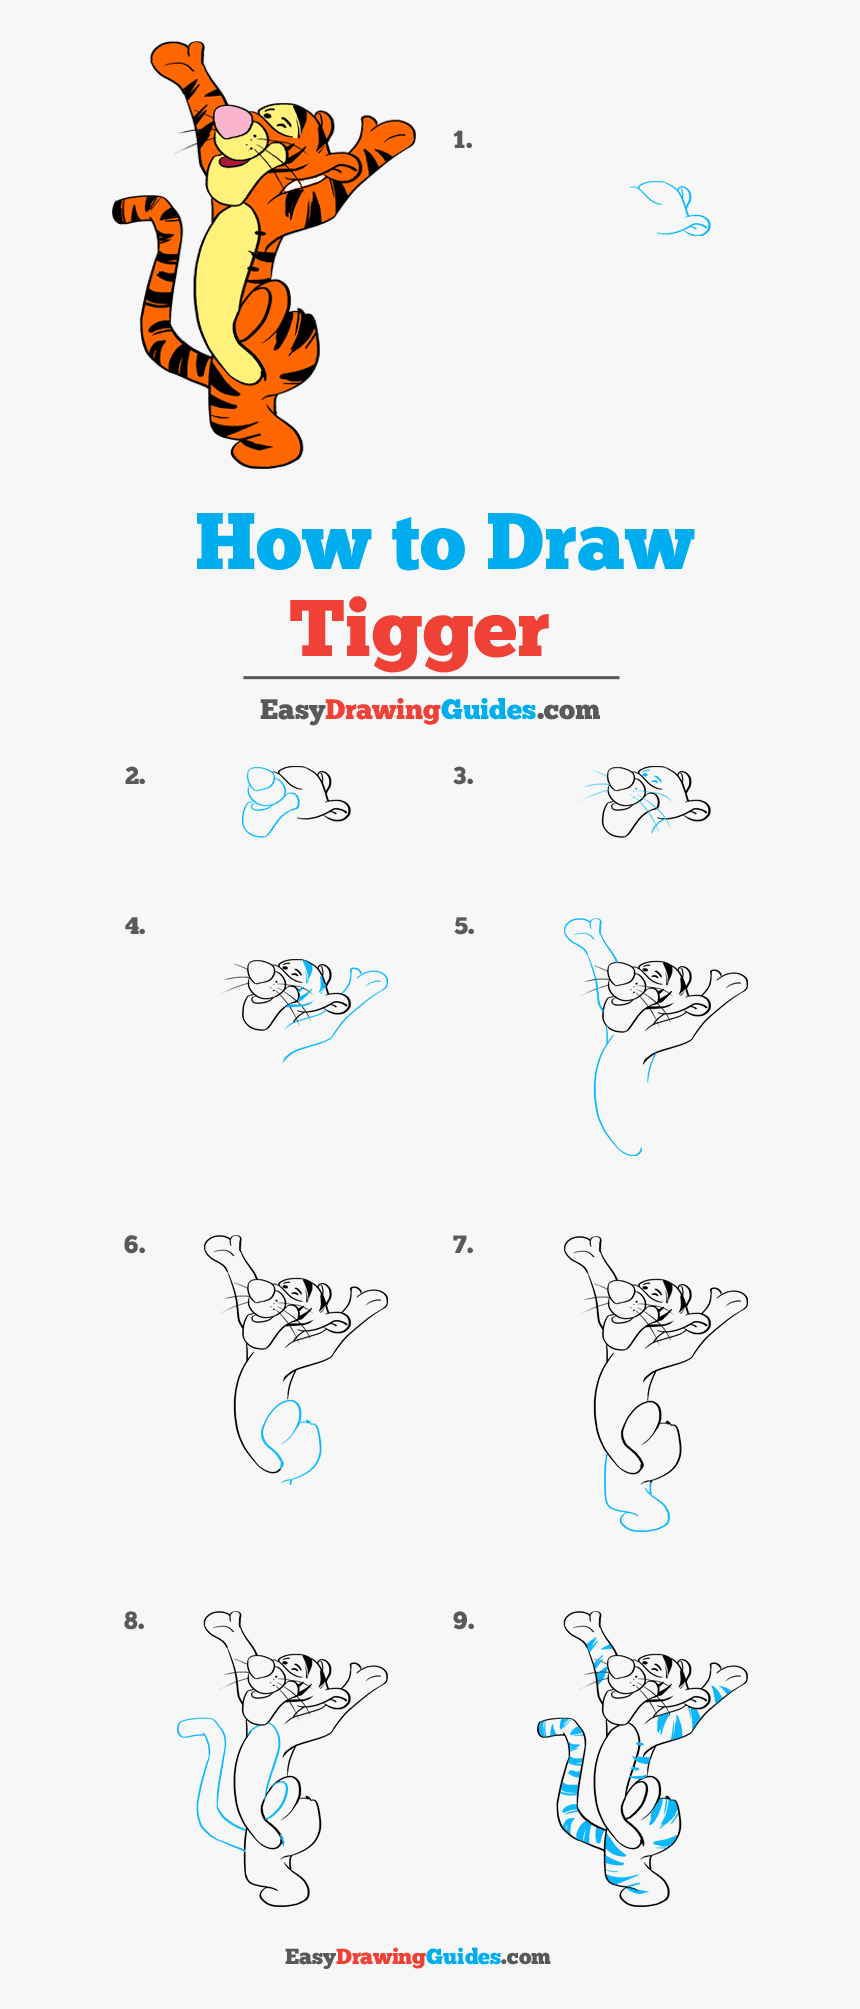 How To Draw Tigger - Draw Tigger Easy, HD Png Download, Free Download